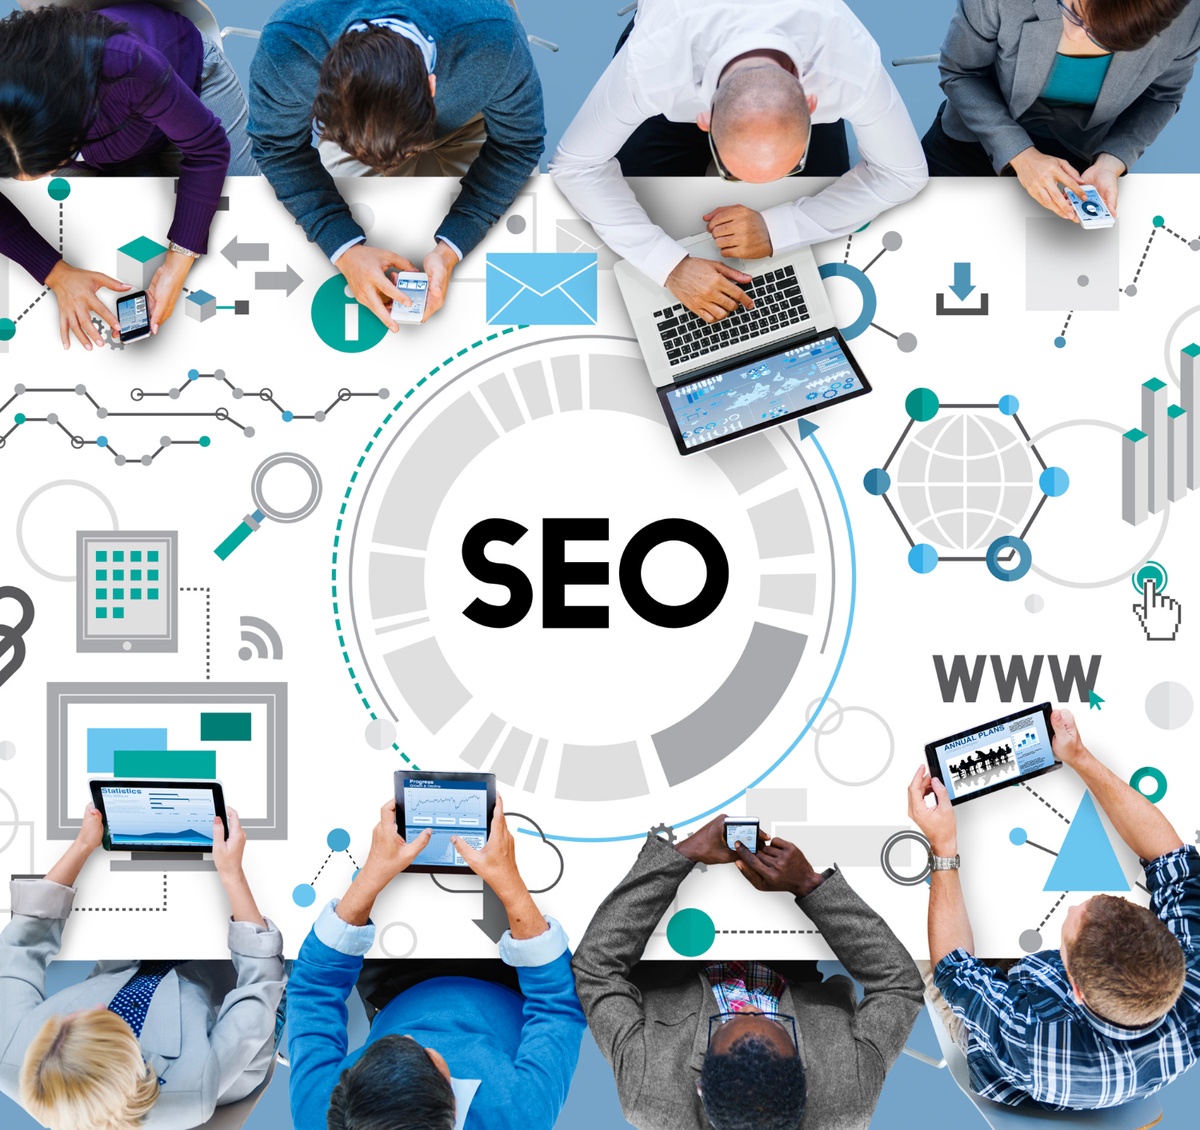 10 Major Technical SEO Checklist: Boost Your Website's Visibility with the Best SEO Services